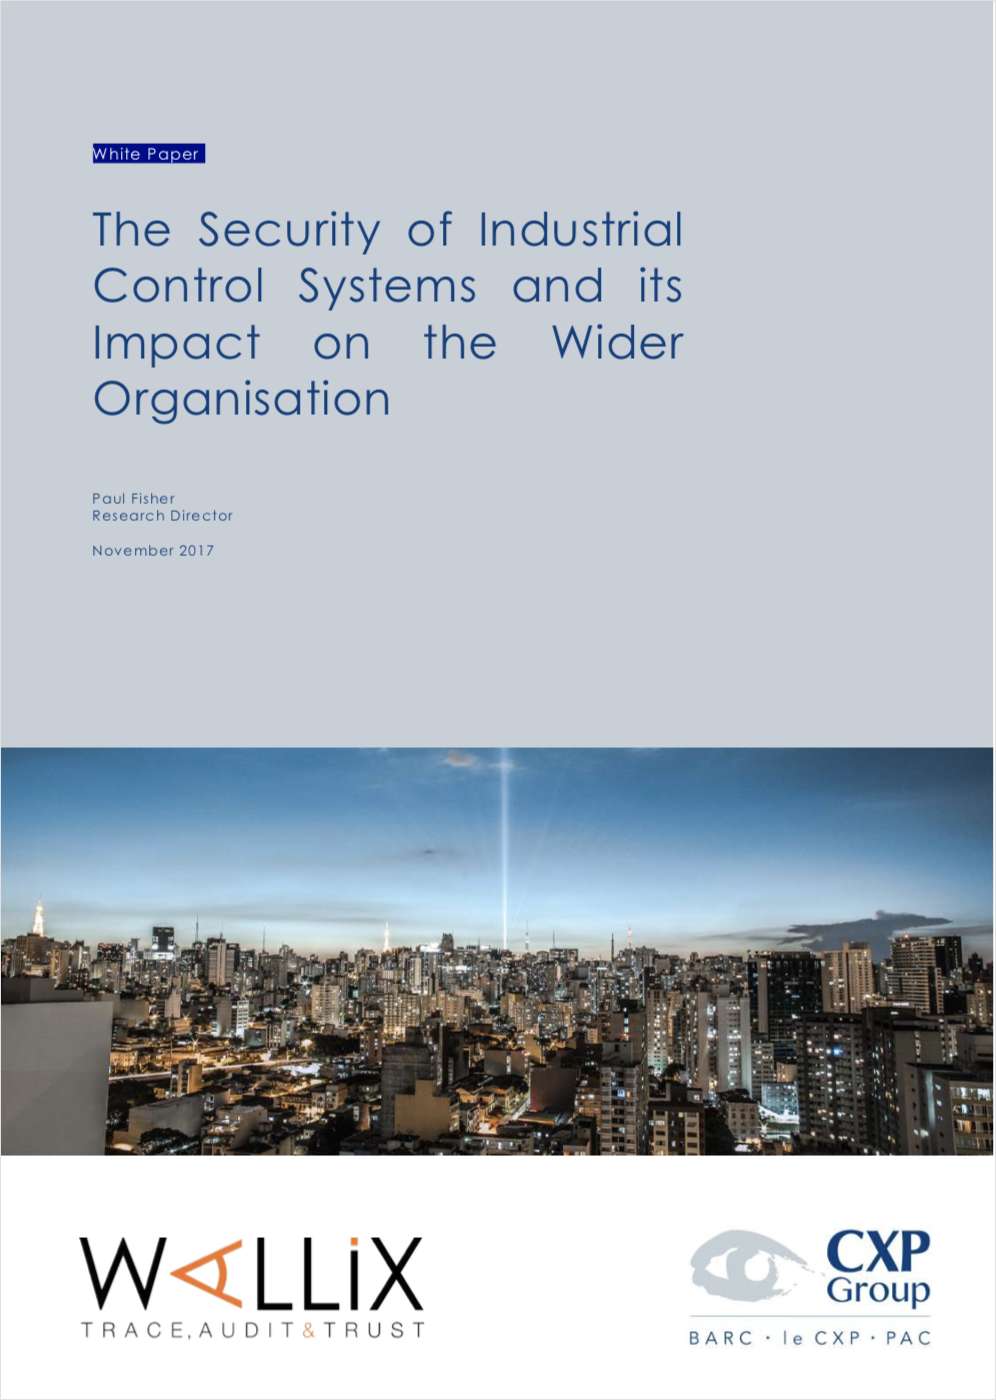 The Security of Industrial Control Systems and its Impact on the Wider Organisation